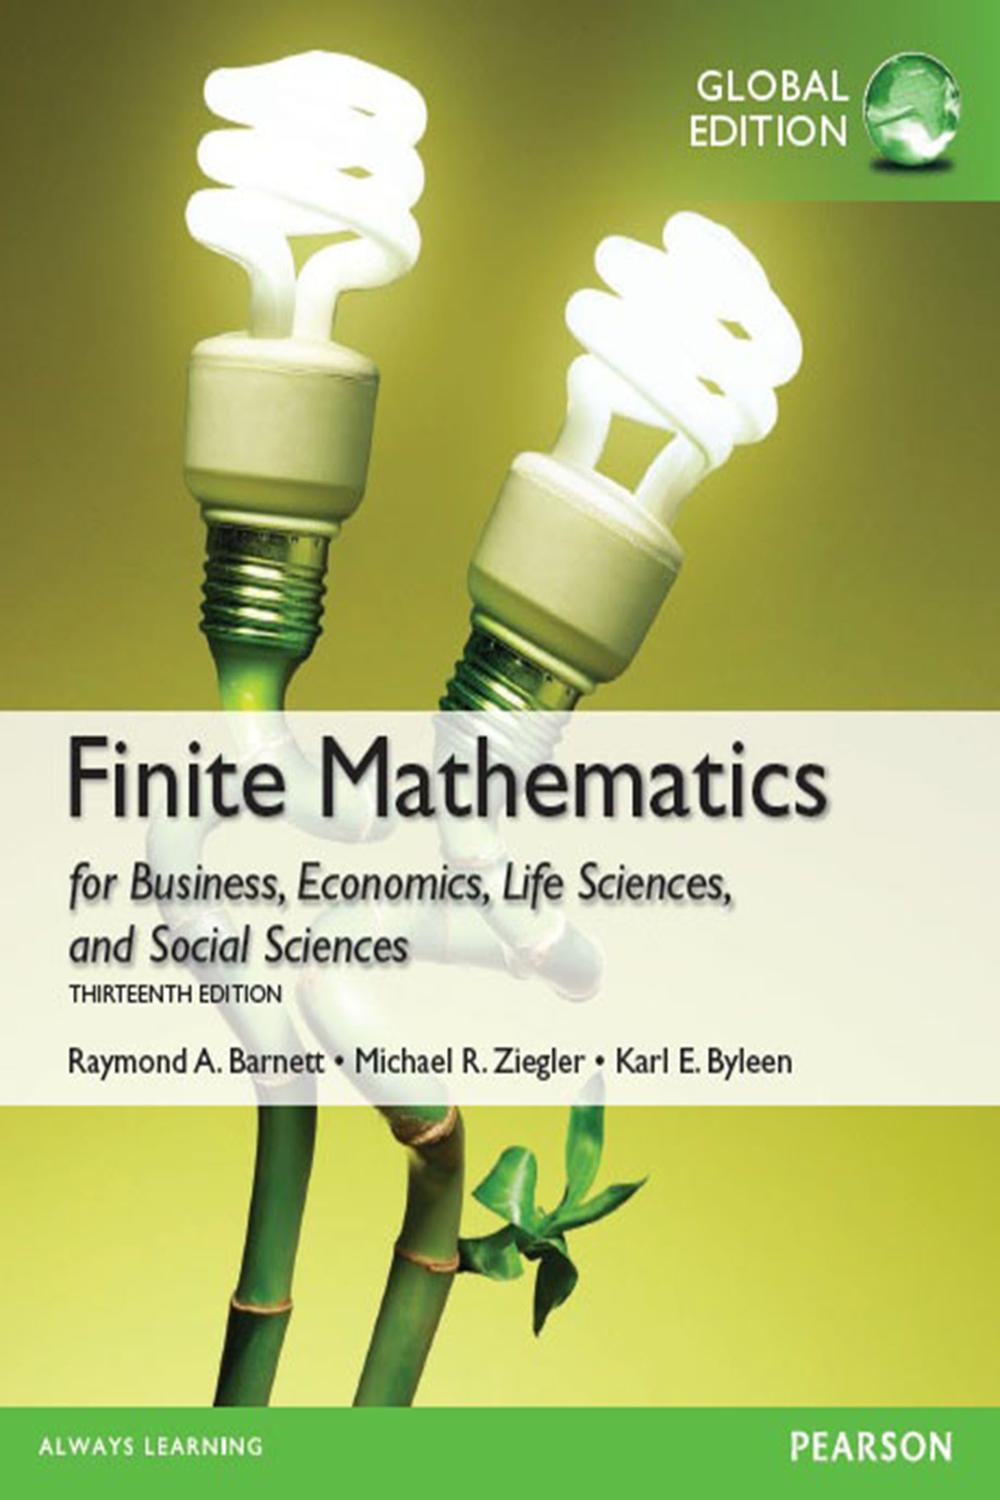 e Book Instant Access for Finite Mathematics for Business, Economics, Life Sciences and Social Sciences,Global Edition - Raymond Barnett, Michael Ziegler, Karl Byleen,,